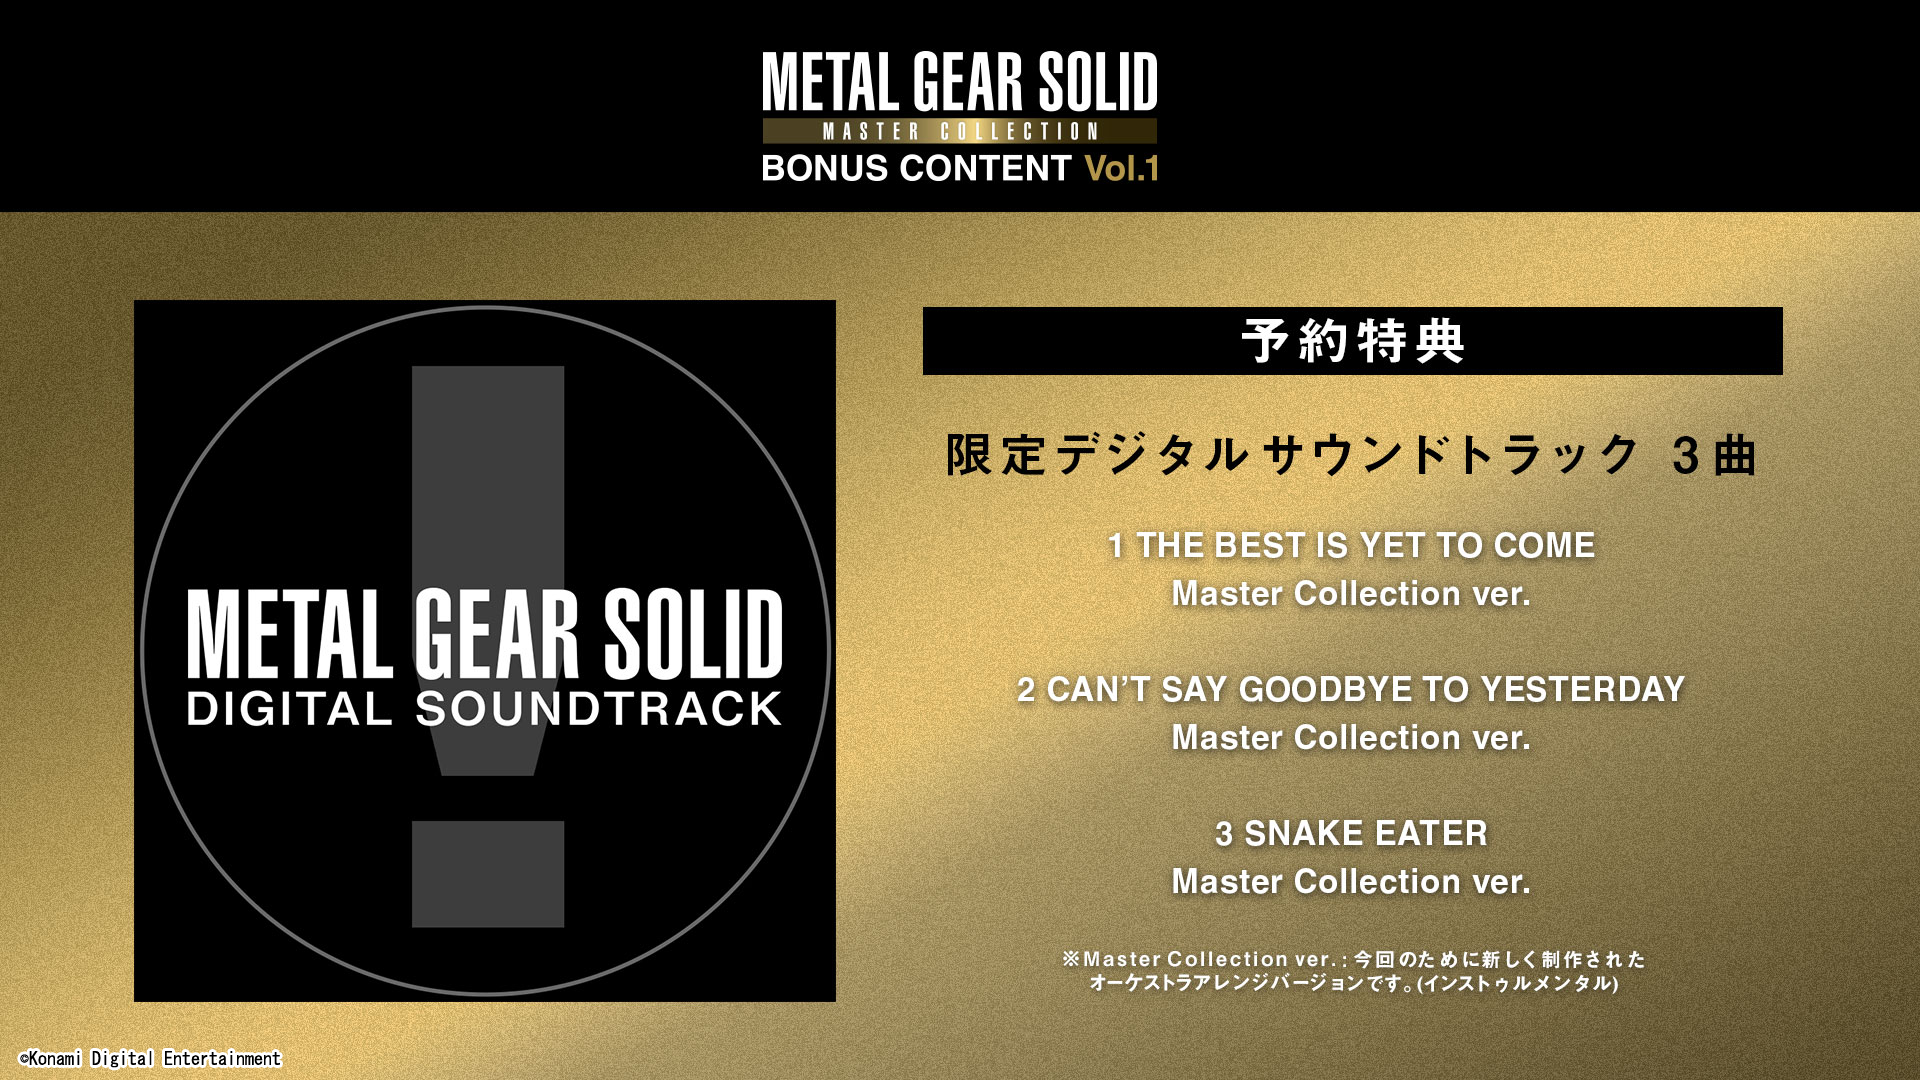 PS METAL GEAR SOLID MASTER COLLECTION Vol 月 日発売決定 本日より予約受付も開始 PlayStation Blog 日本語